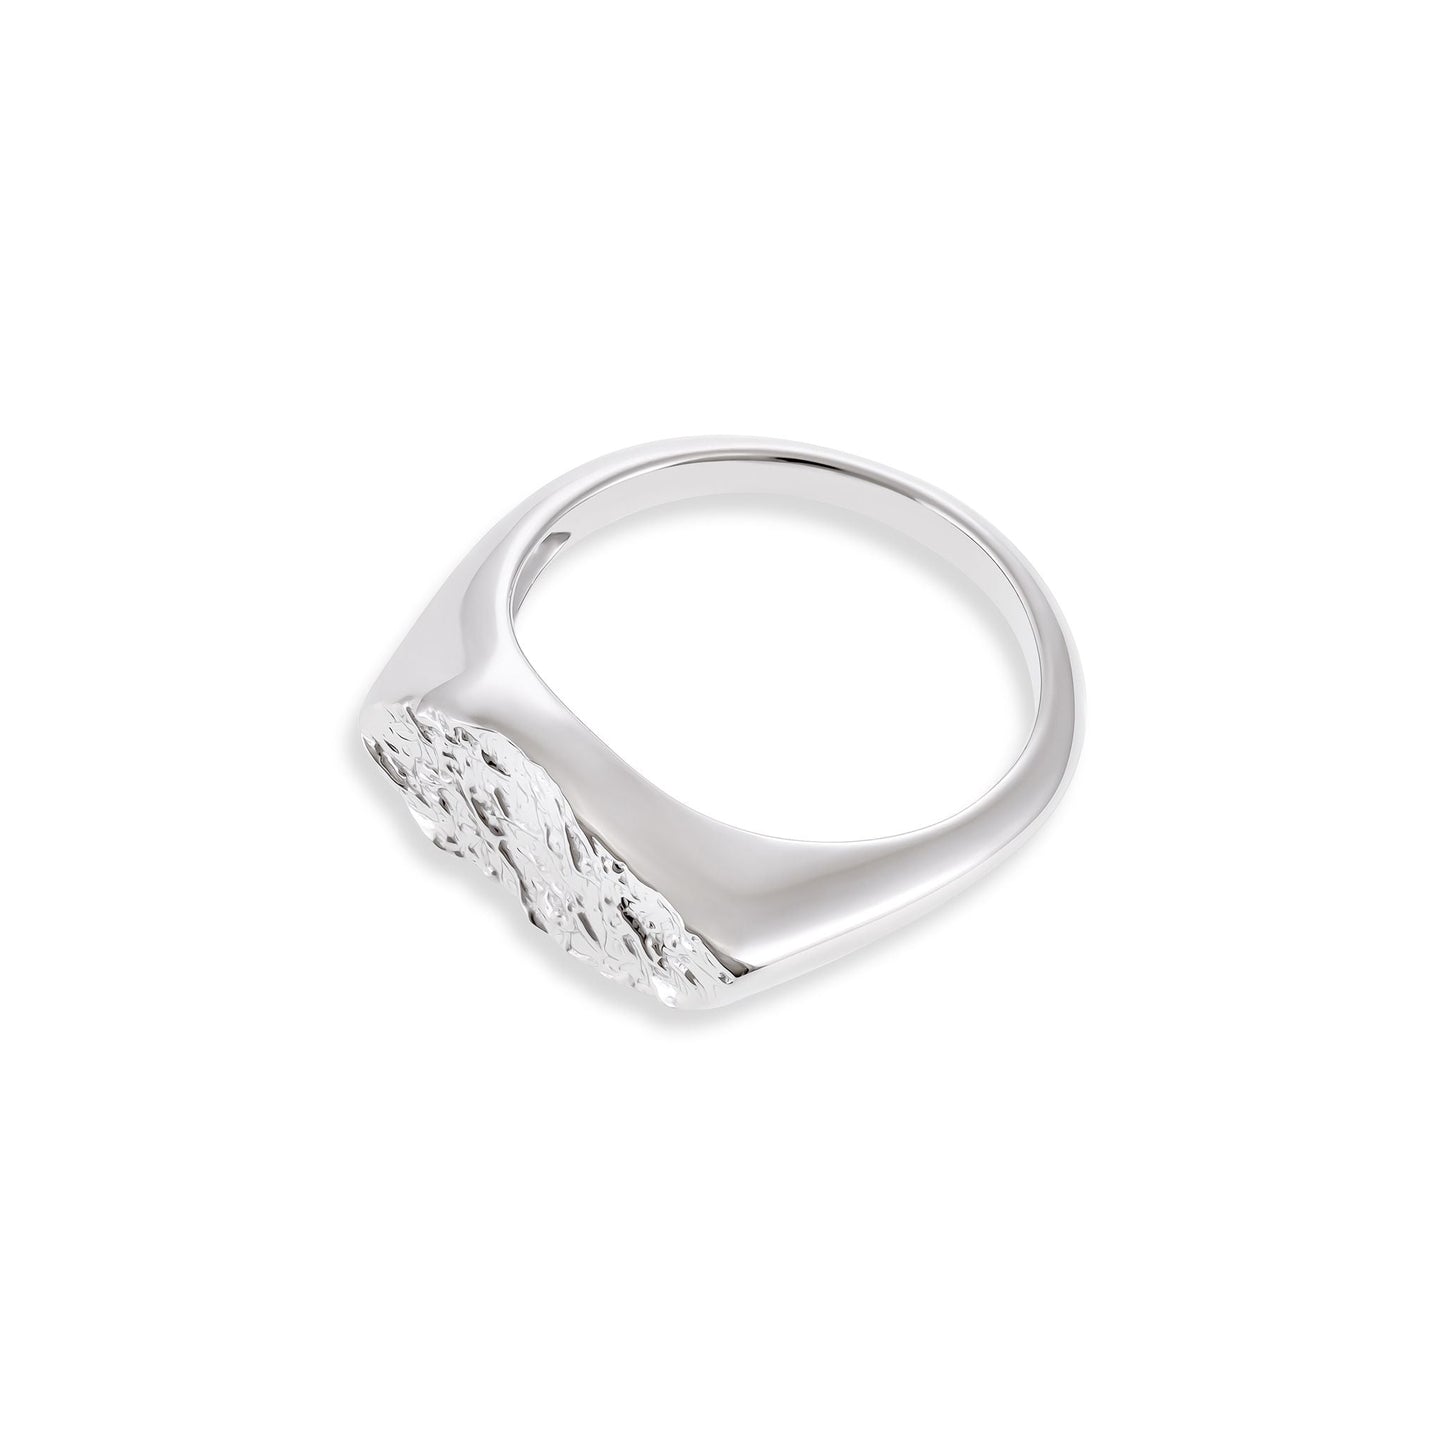 925 sterling silver rhodium plated nugget ring SRN3004 - FJewellery